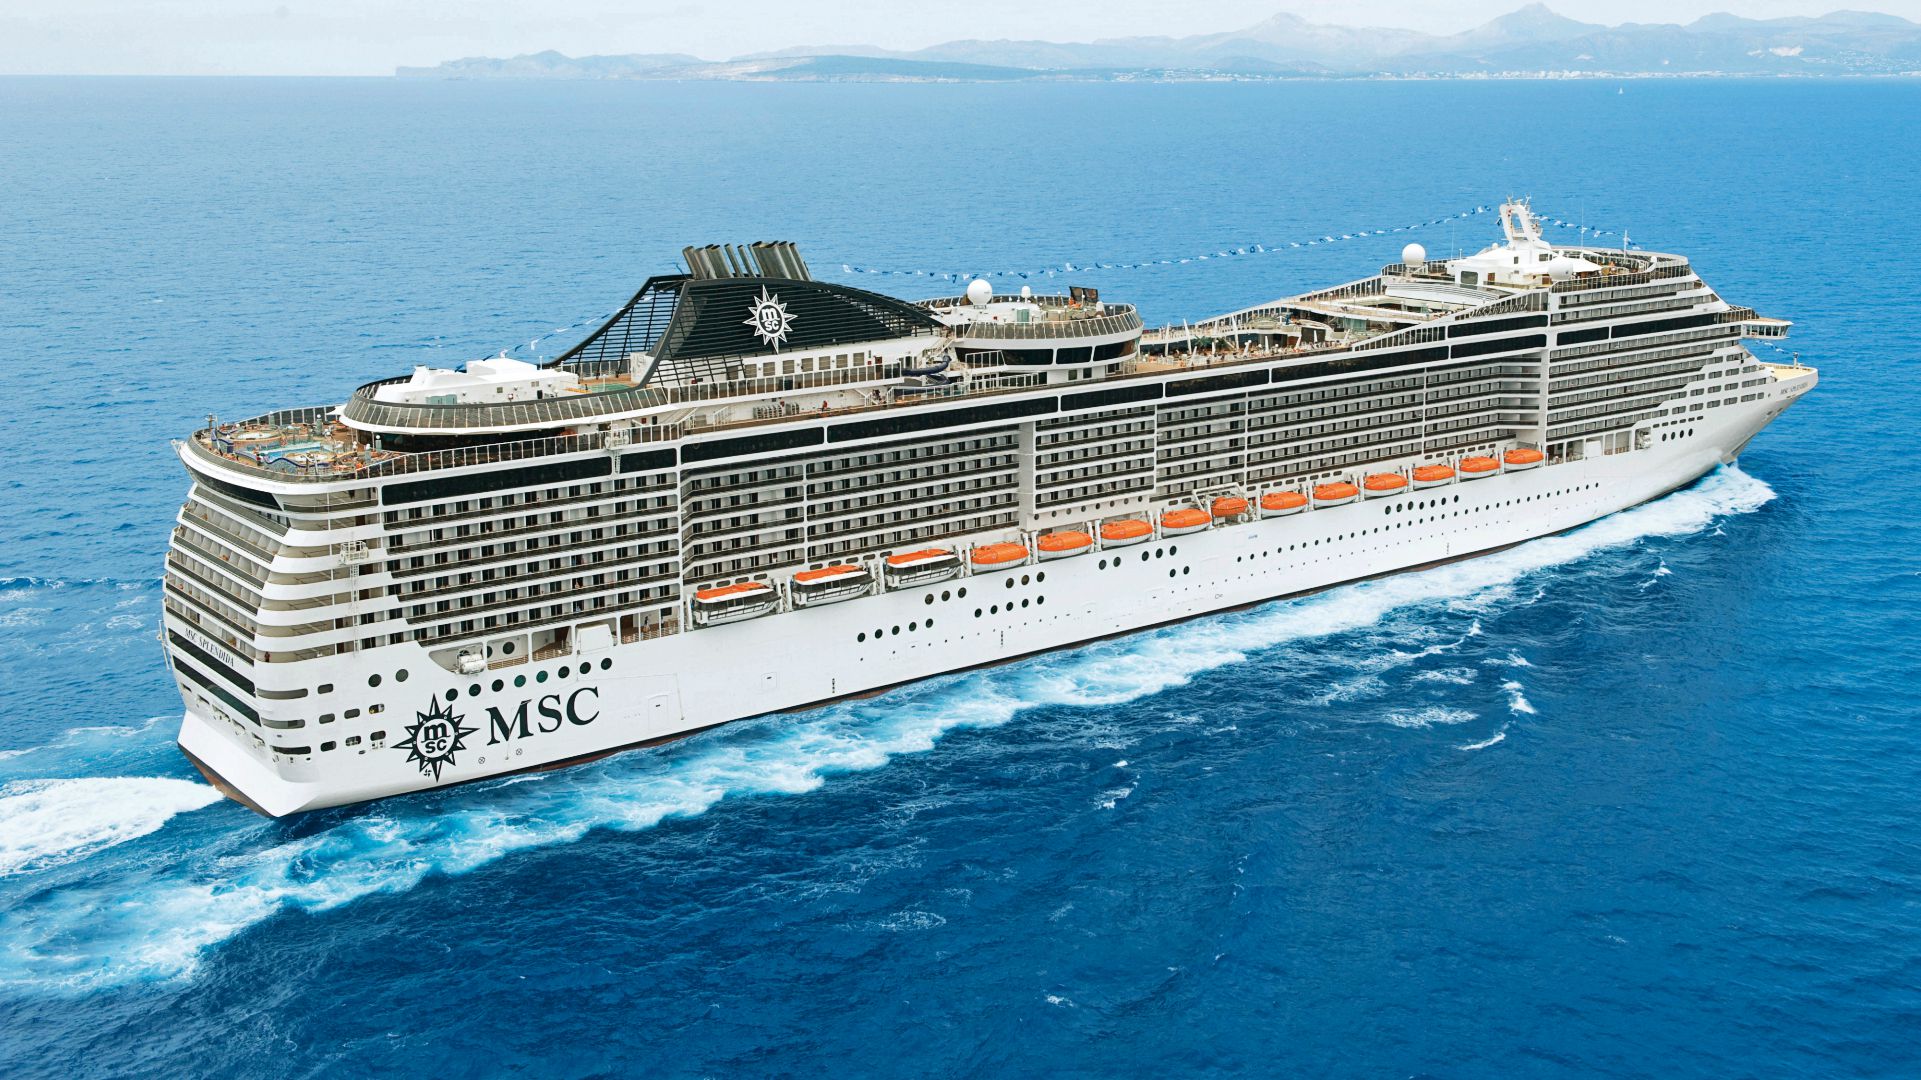 MSC Cruises seeking qualified TT nationals to join their team